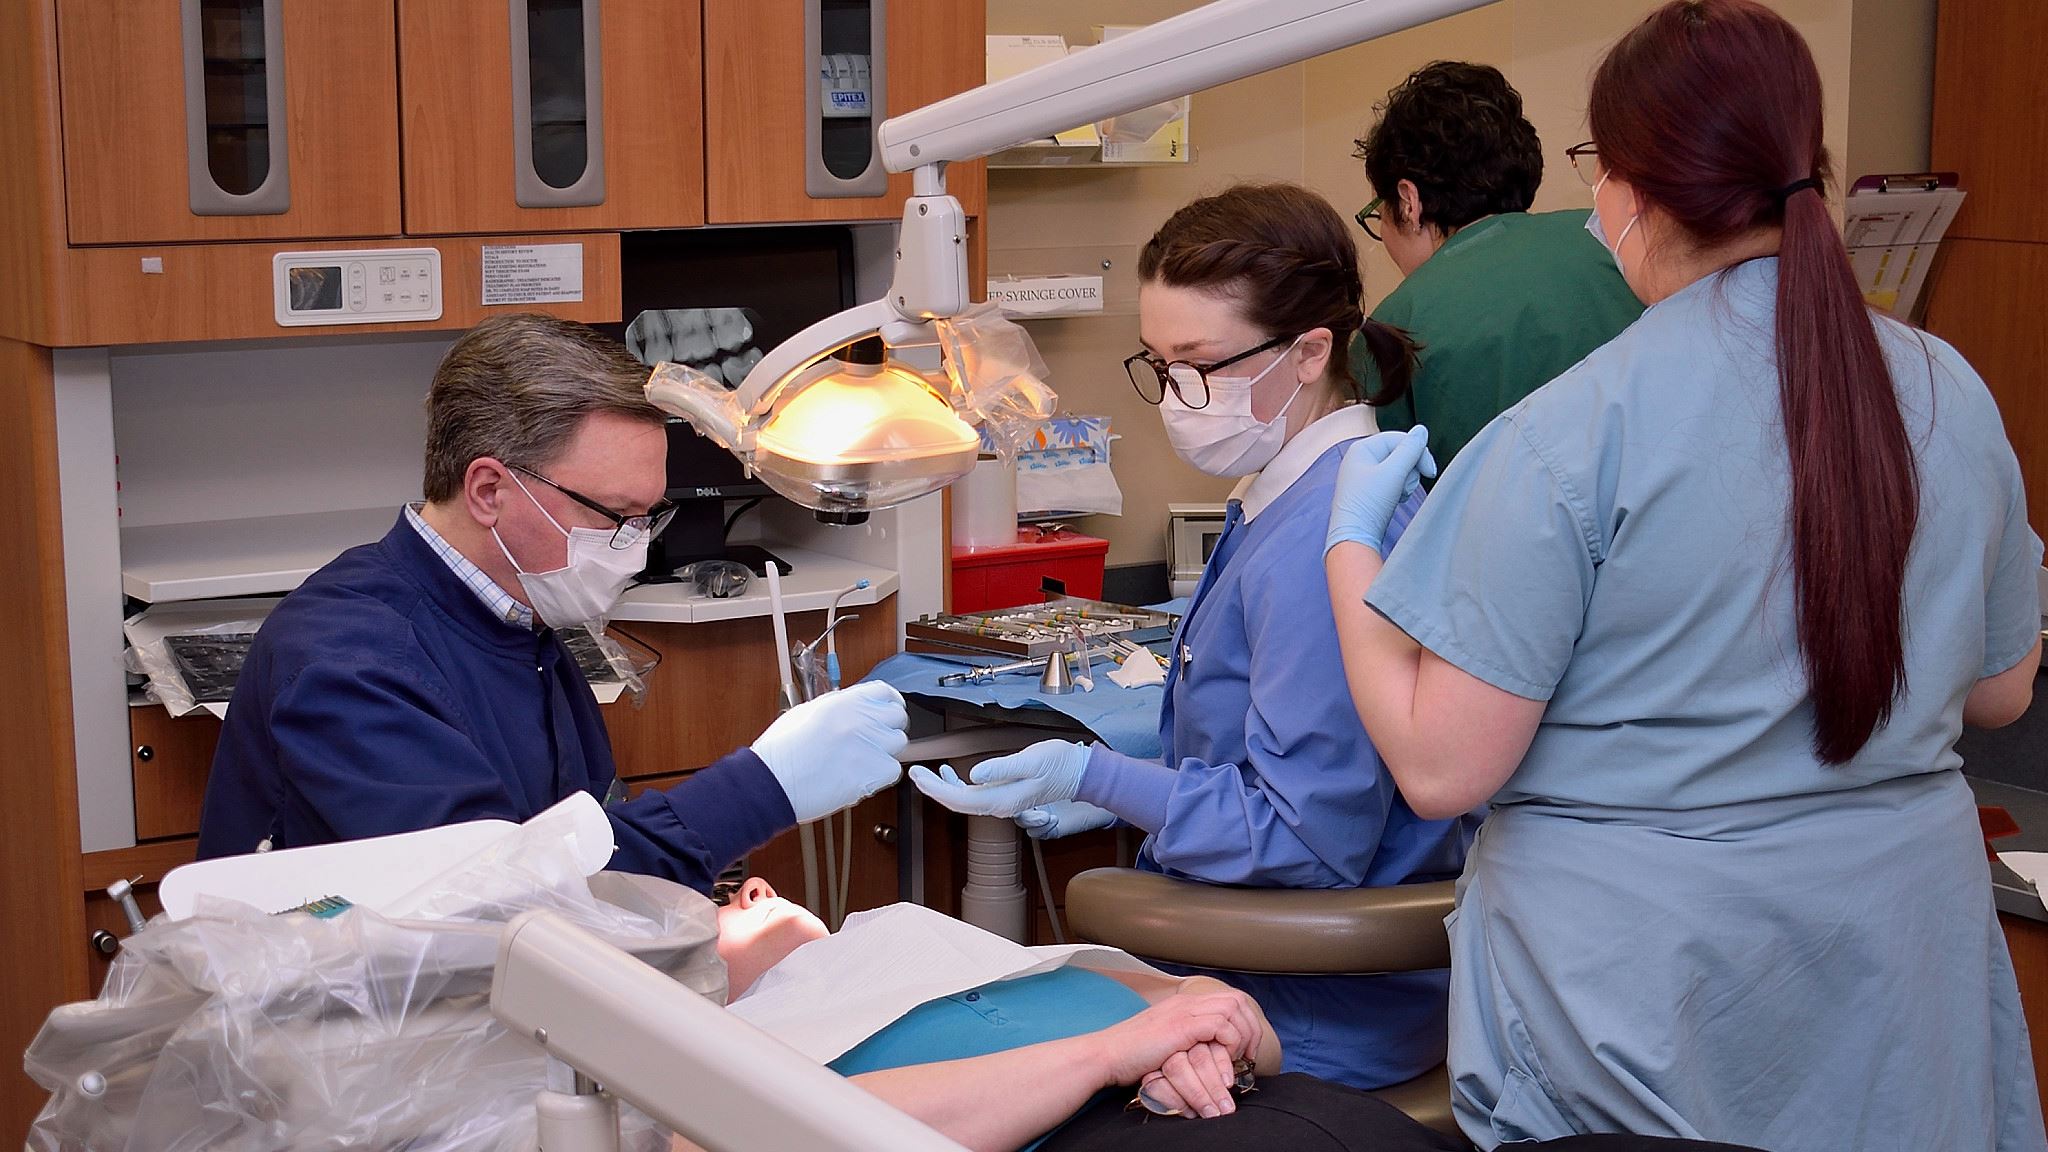 Dental students helping dentist with patient